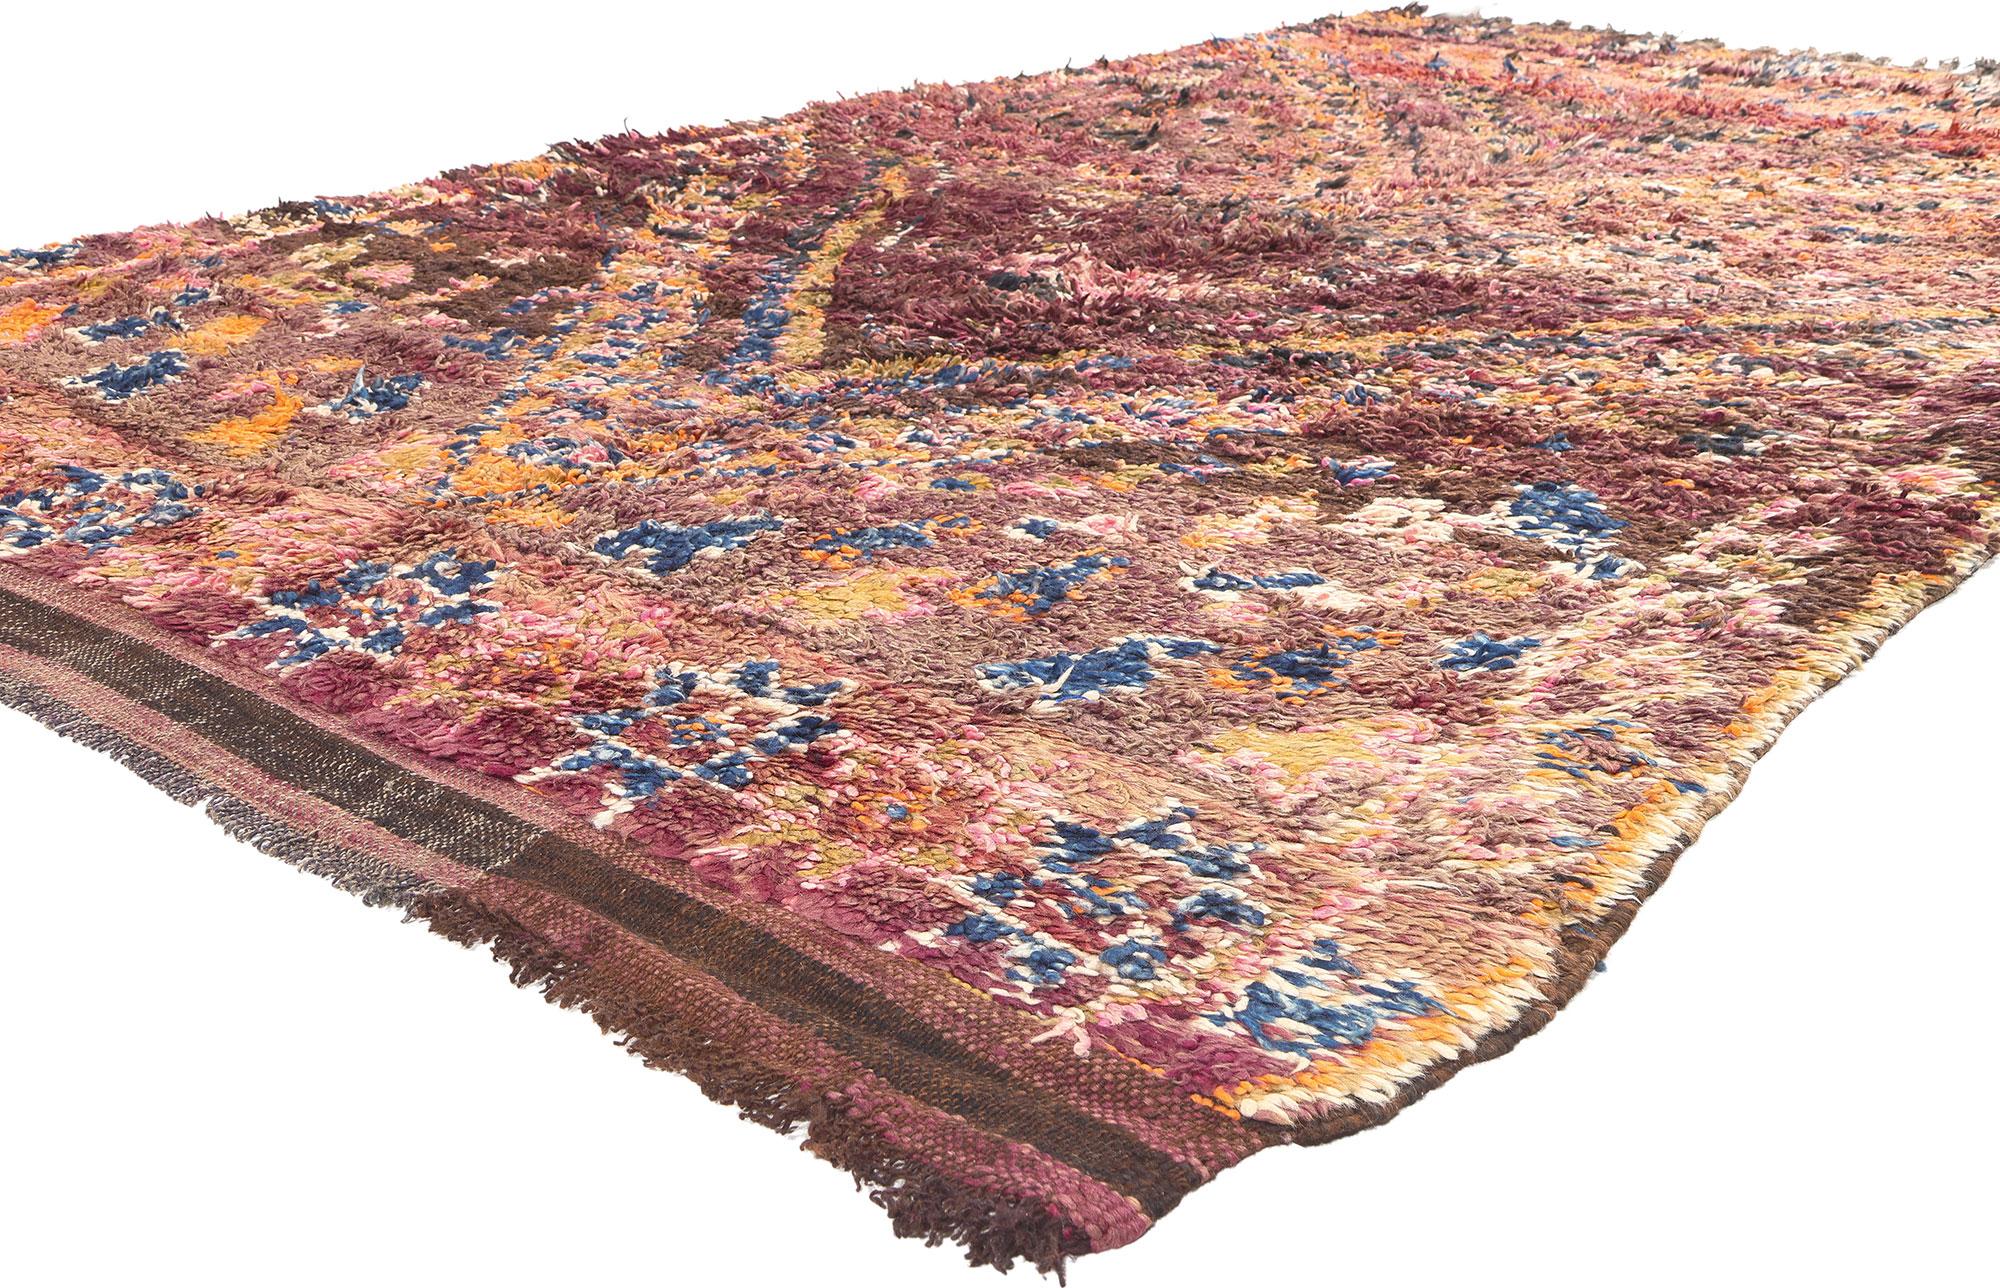 21329 Vintage Beni MGuild Moroccan Rug, 05'11 x 10'07.
In the enchanting embrace of the Atlas Mountains in Morocco, the skilled hands of Berber women from the Ait M'Guild tribe weave captivating narratives through the artistry of Beni Mguild rugs.